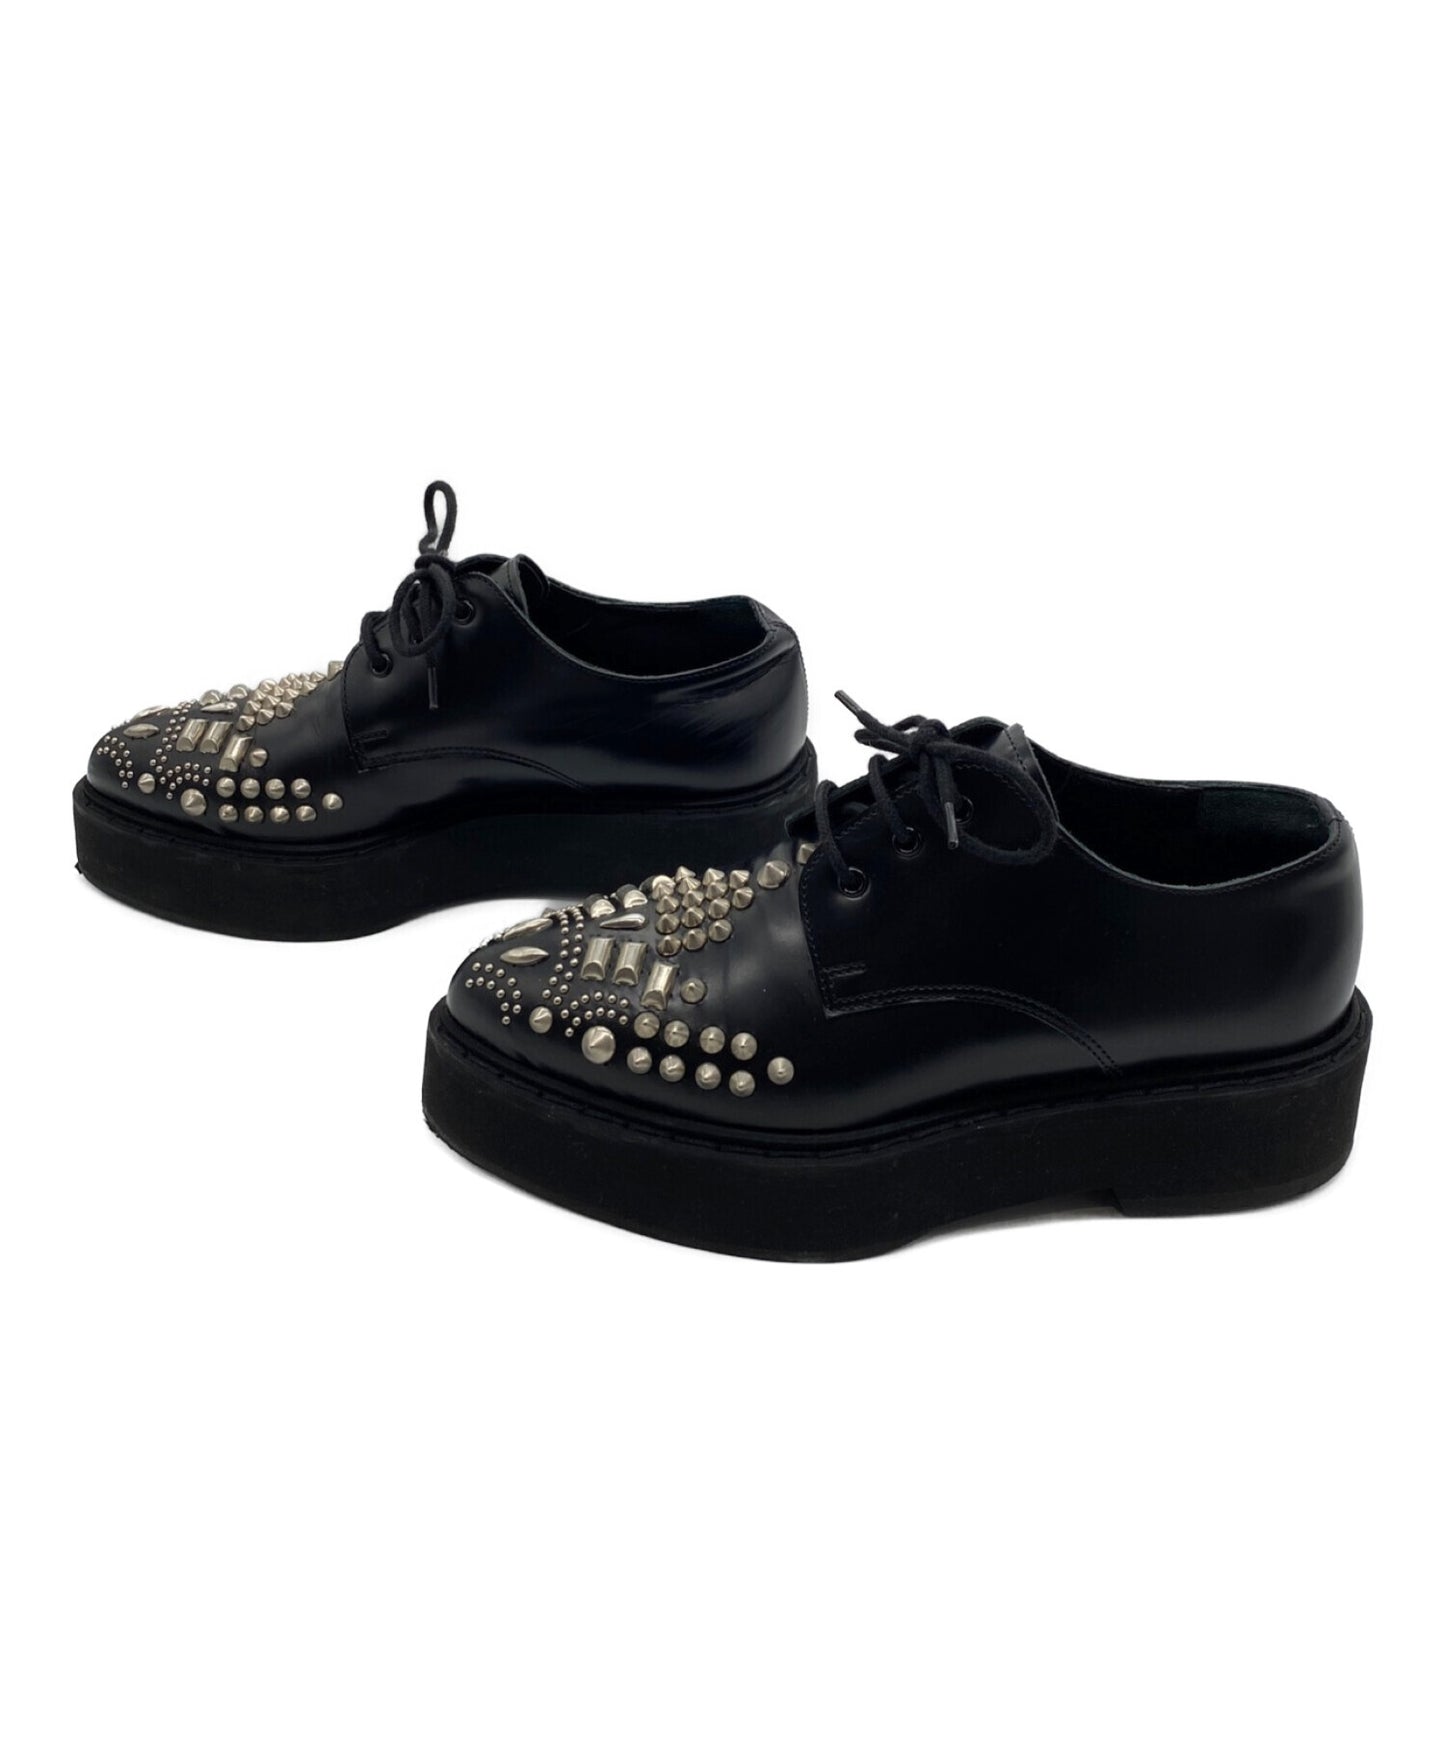 ALEXANDER McQUEEN Studded Leather Shoes